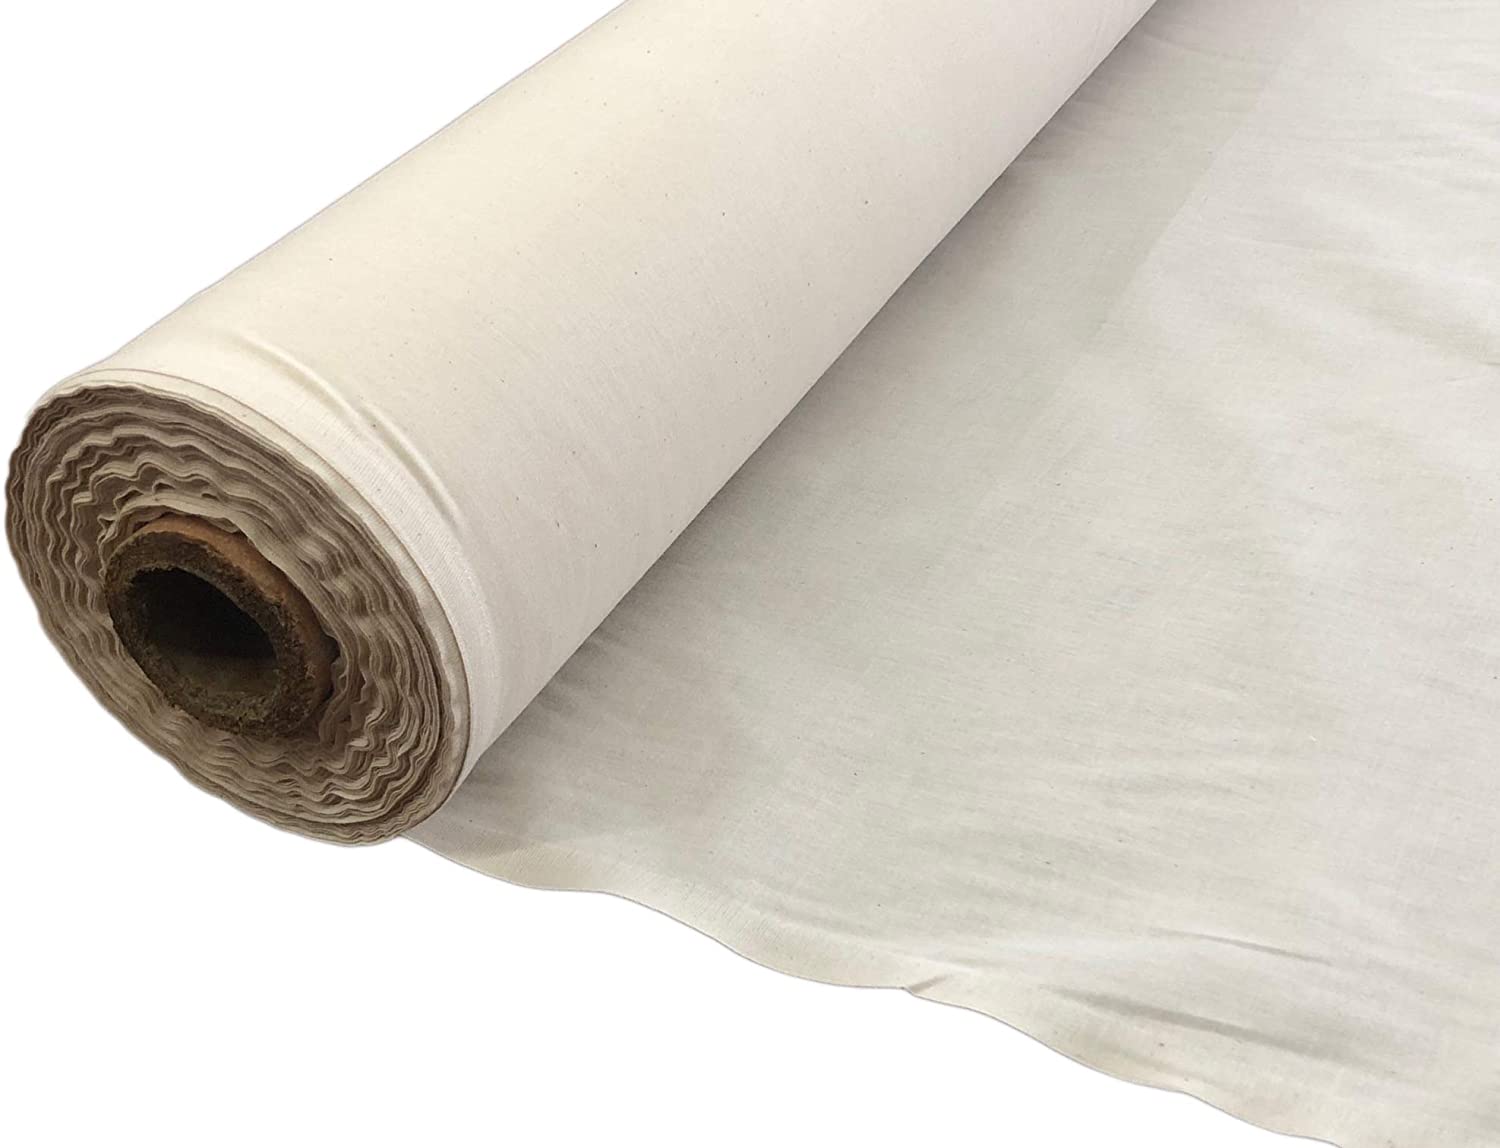 5 Yards Unbleached Muslin Fabric-image